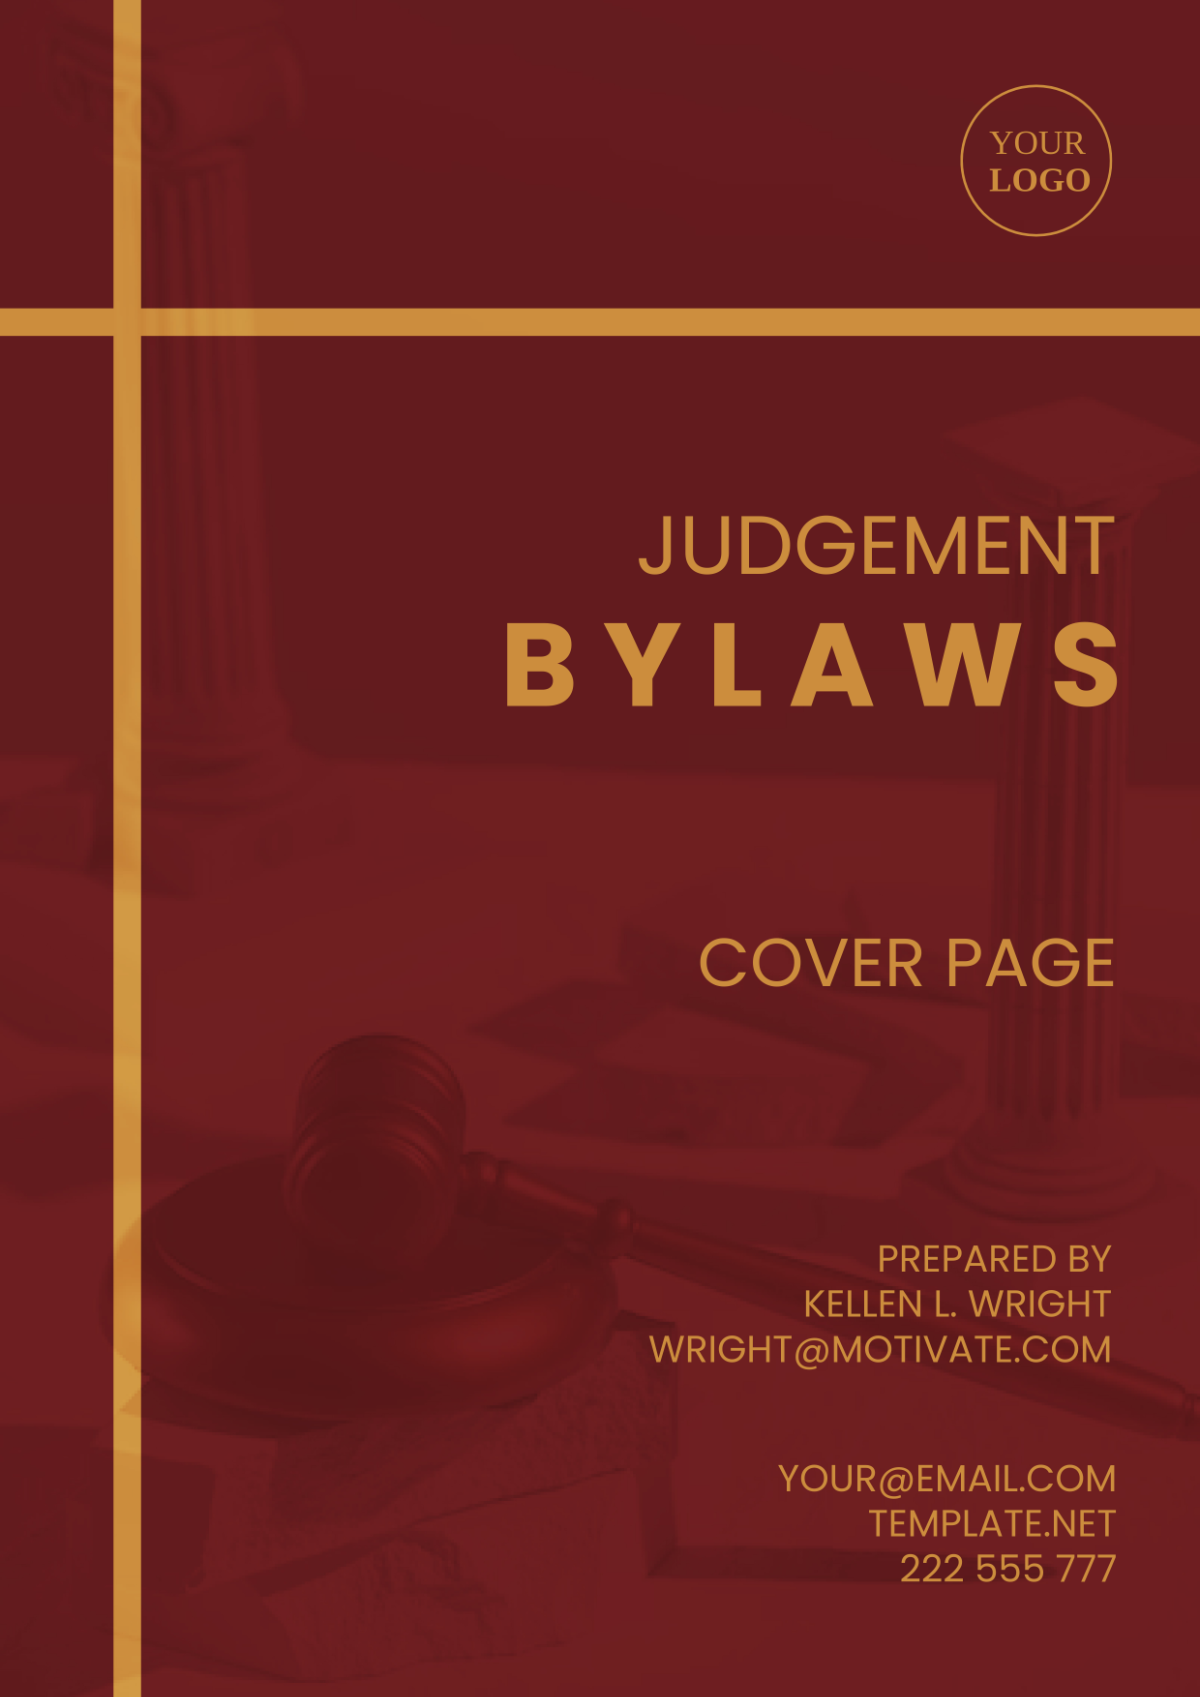 Judgement Bylaws Cover Page